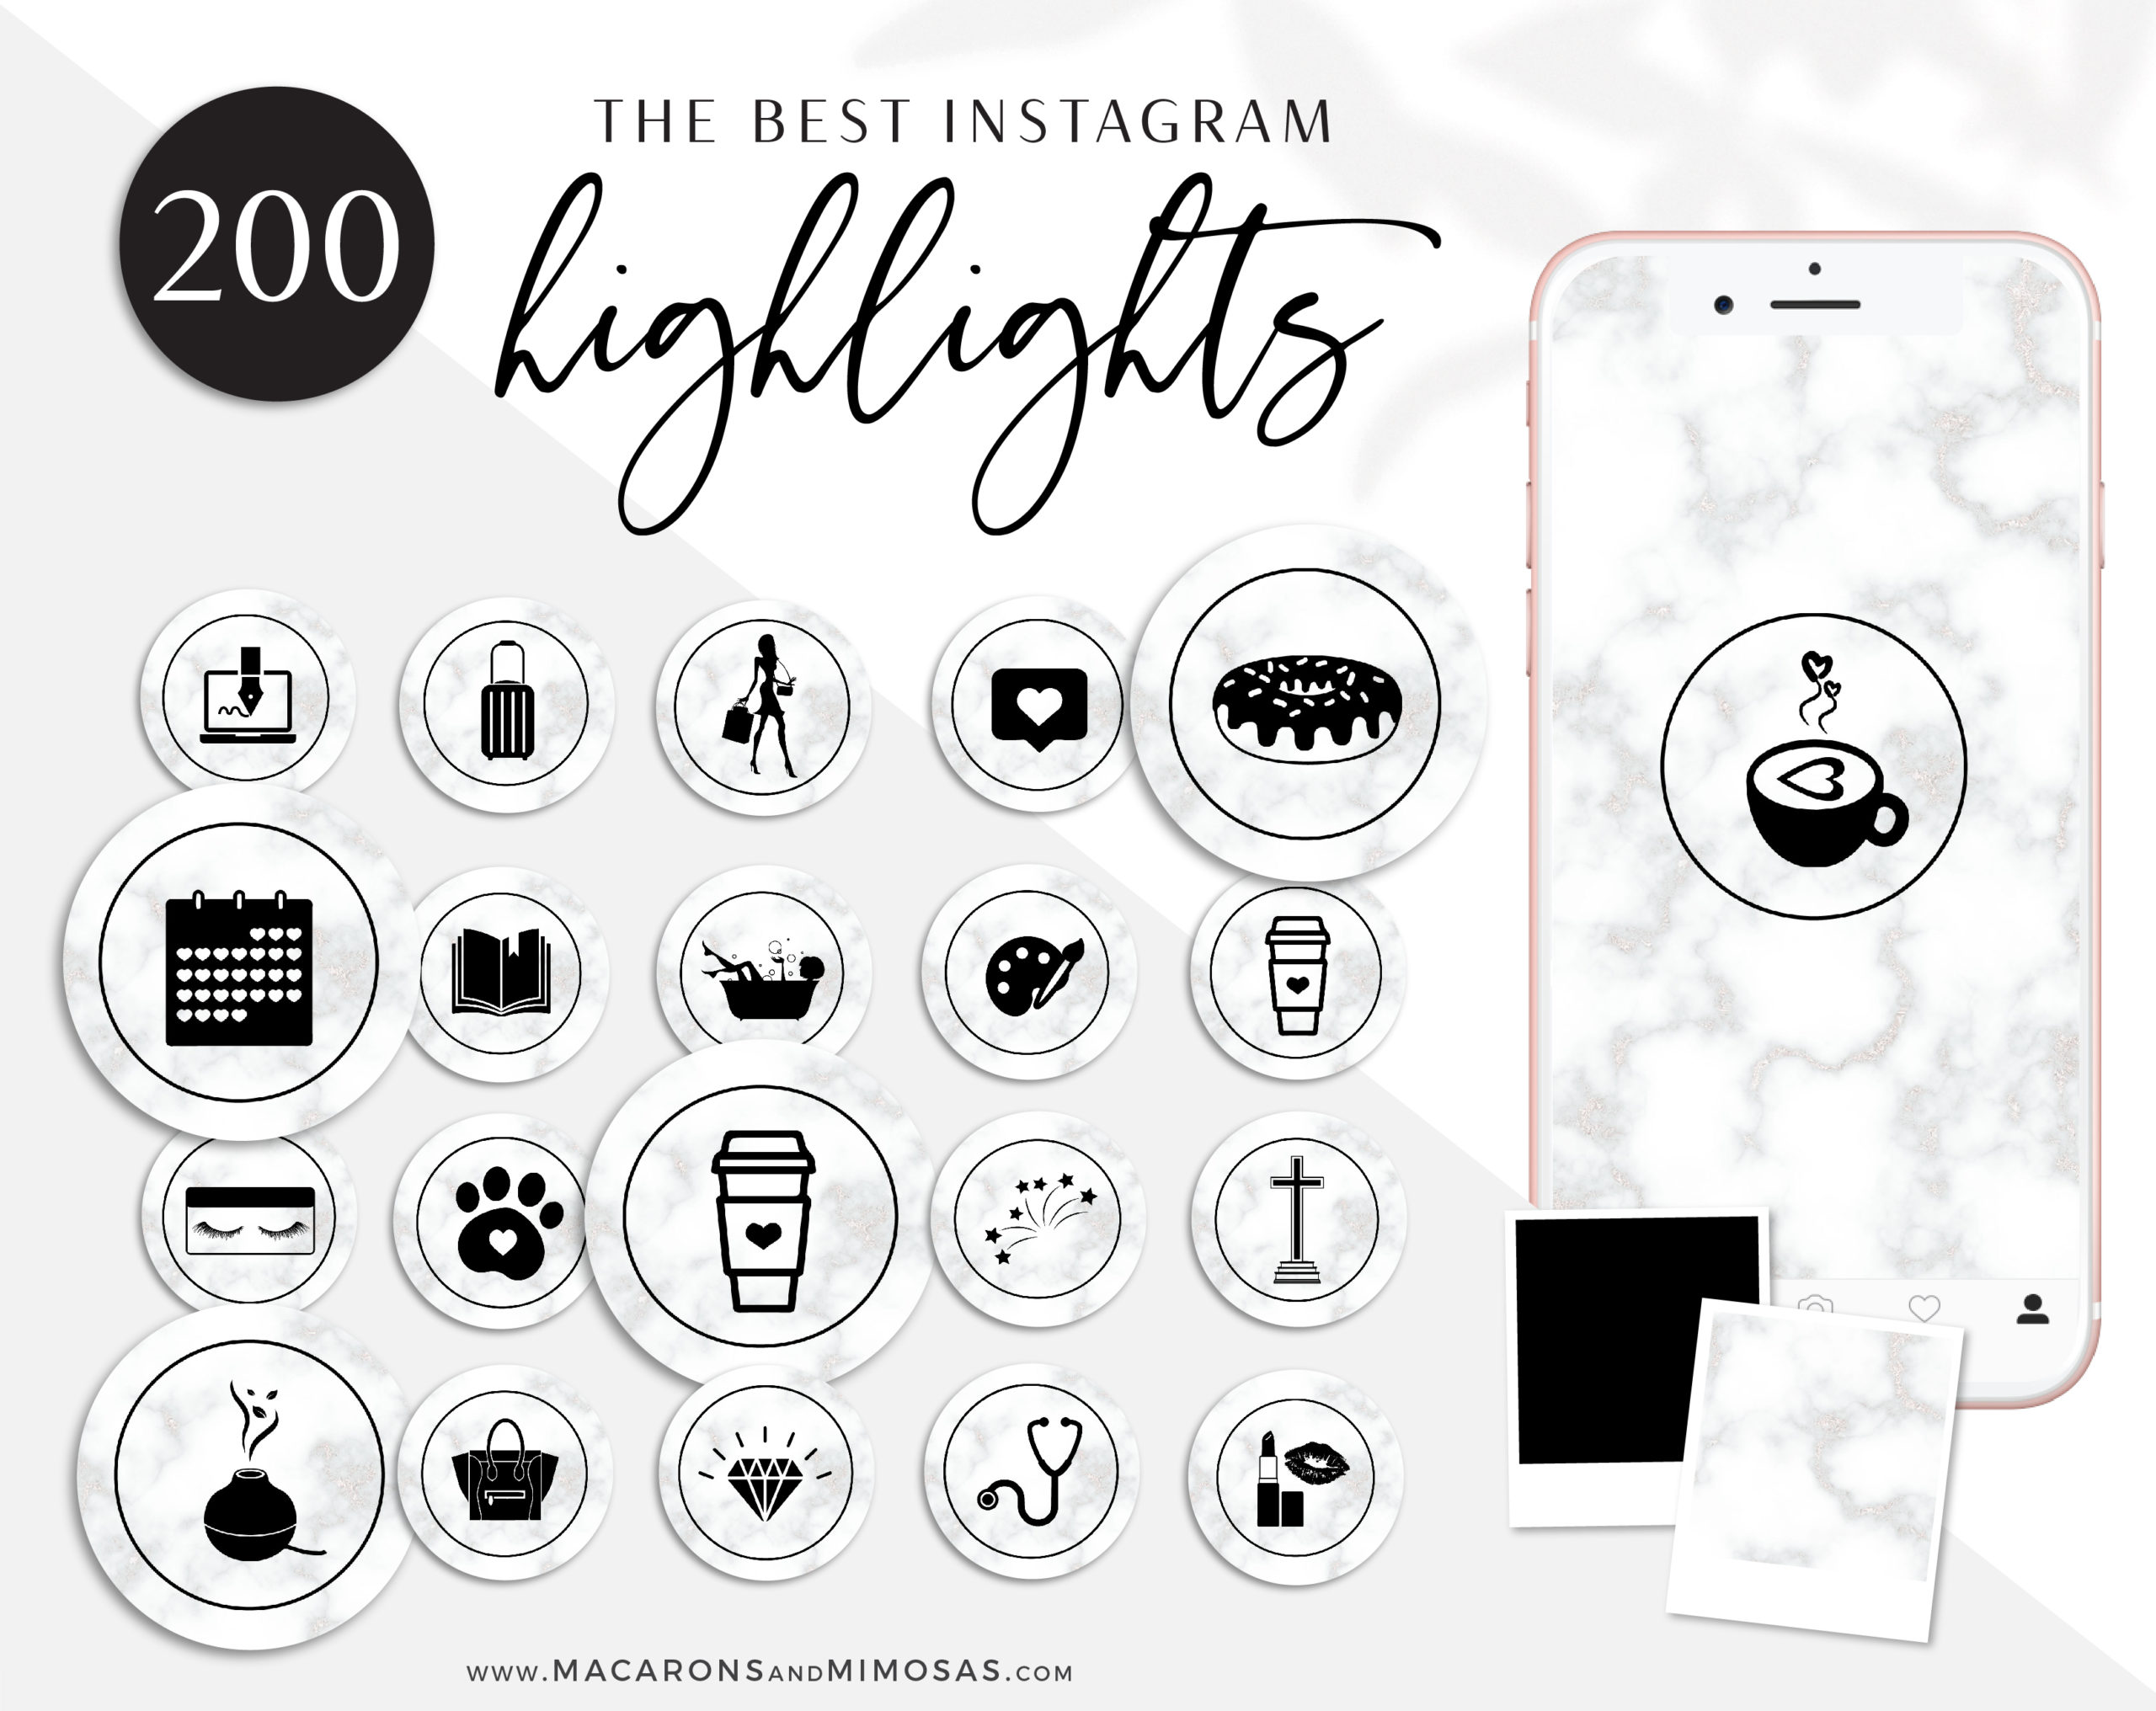 Marble Instagram Highlights, 200 Instagram Story Hightligh IconCovers, Black Marble Icons for Fashion, Beauty and Lifestyle Highlights